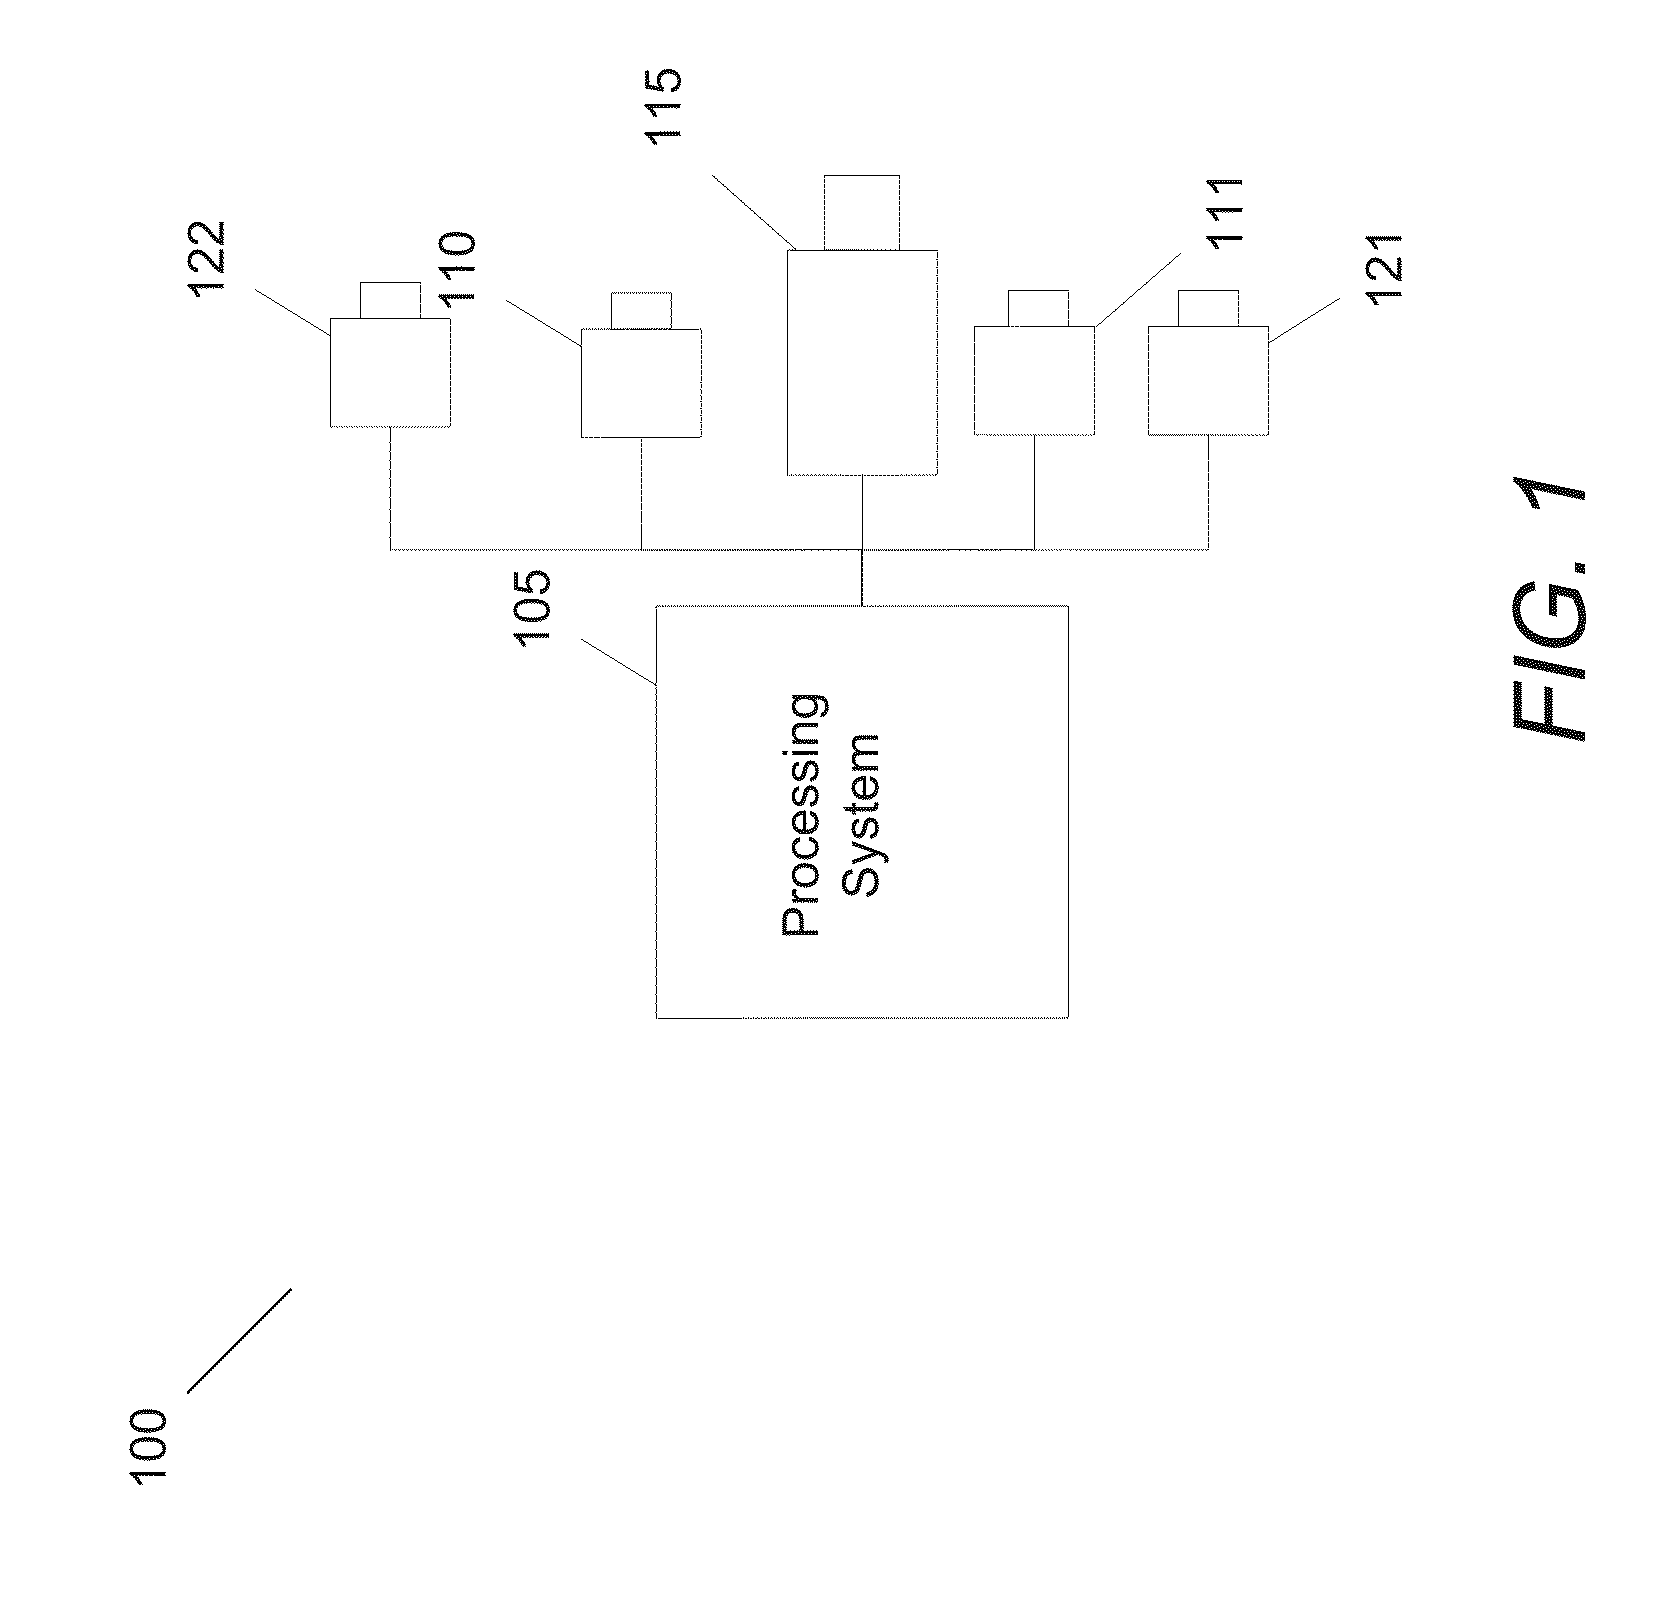 Systems and Methods for Interacting with a Projected User Interface